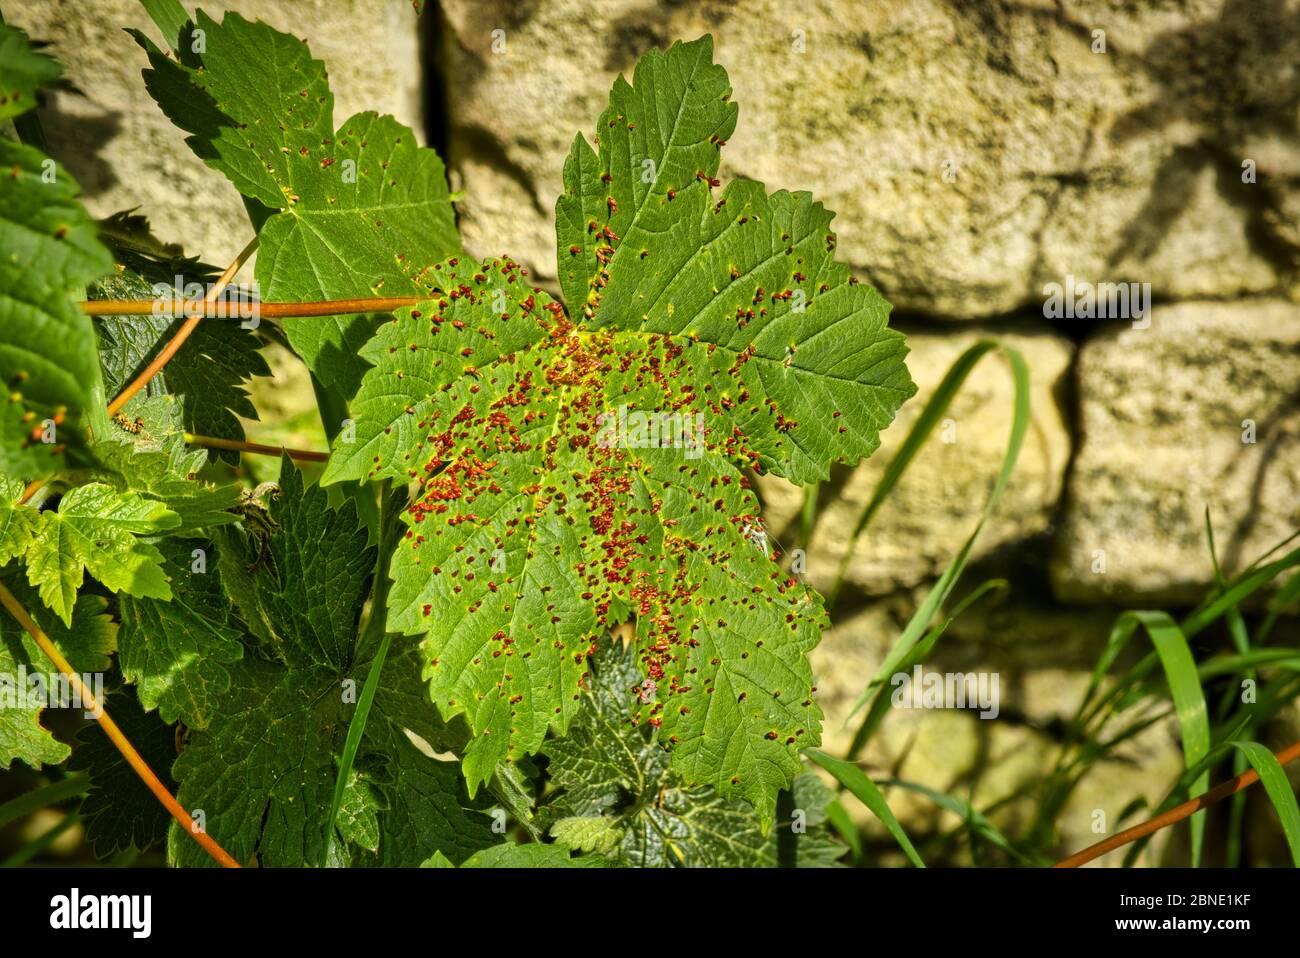 Red pimples on a Sycamore leaf Acer pseudoplantus caused by pimple gall mite damage Stock Photo